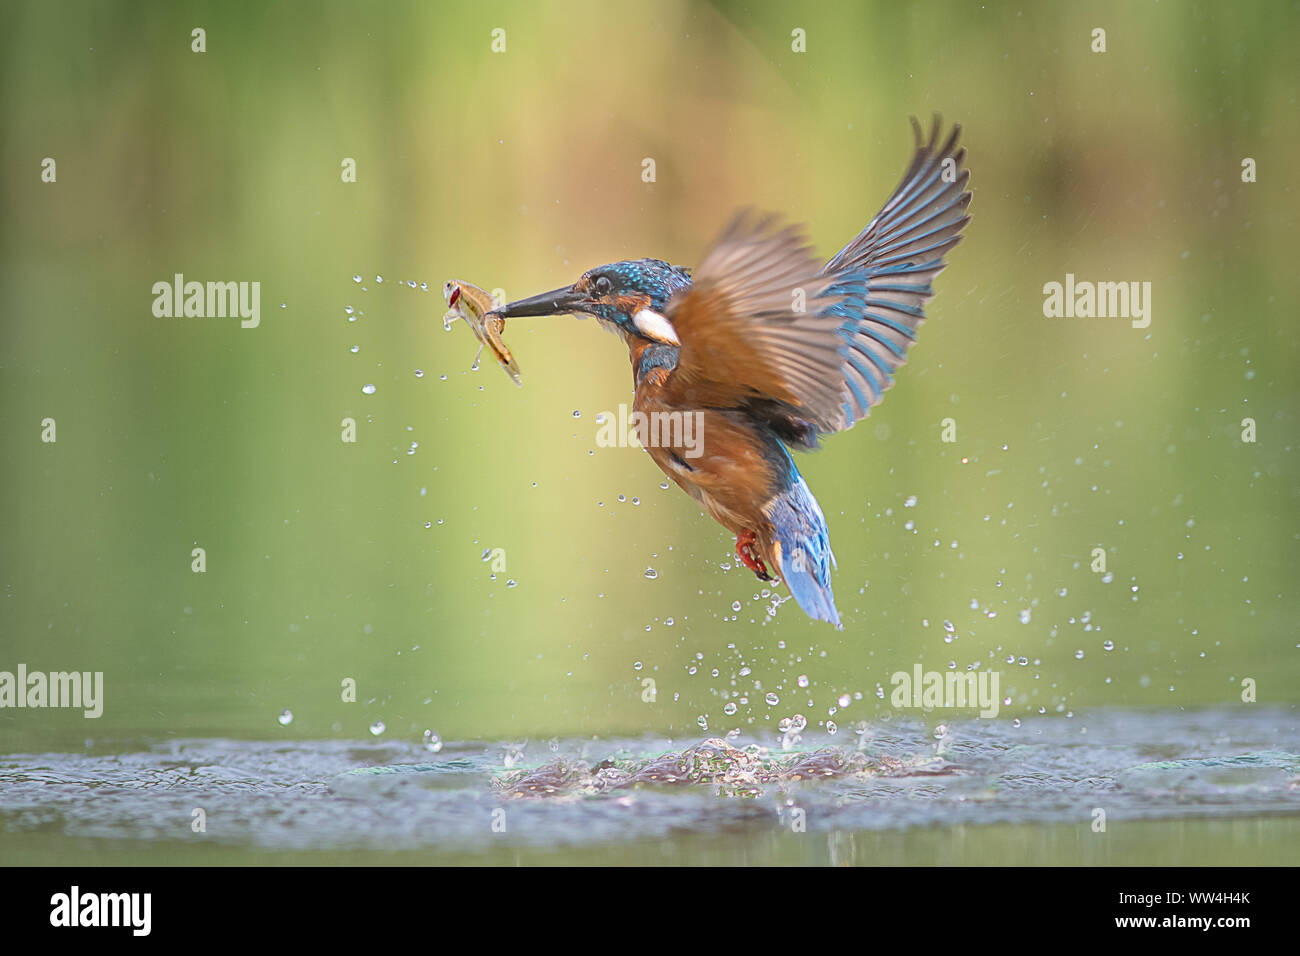 A male kingfisher Alcedo atthis leaves the water with a minnow in its beak and its wings spread Stock Photo